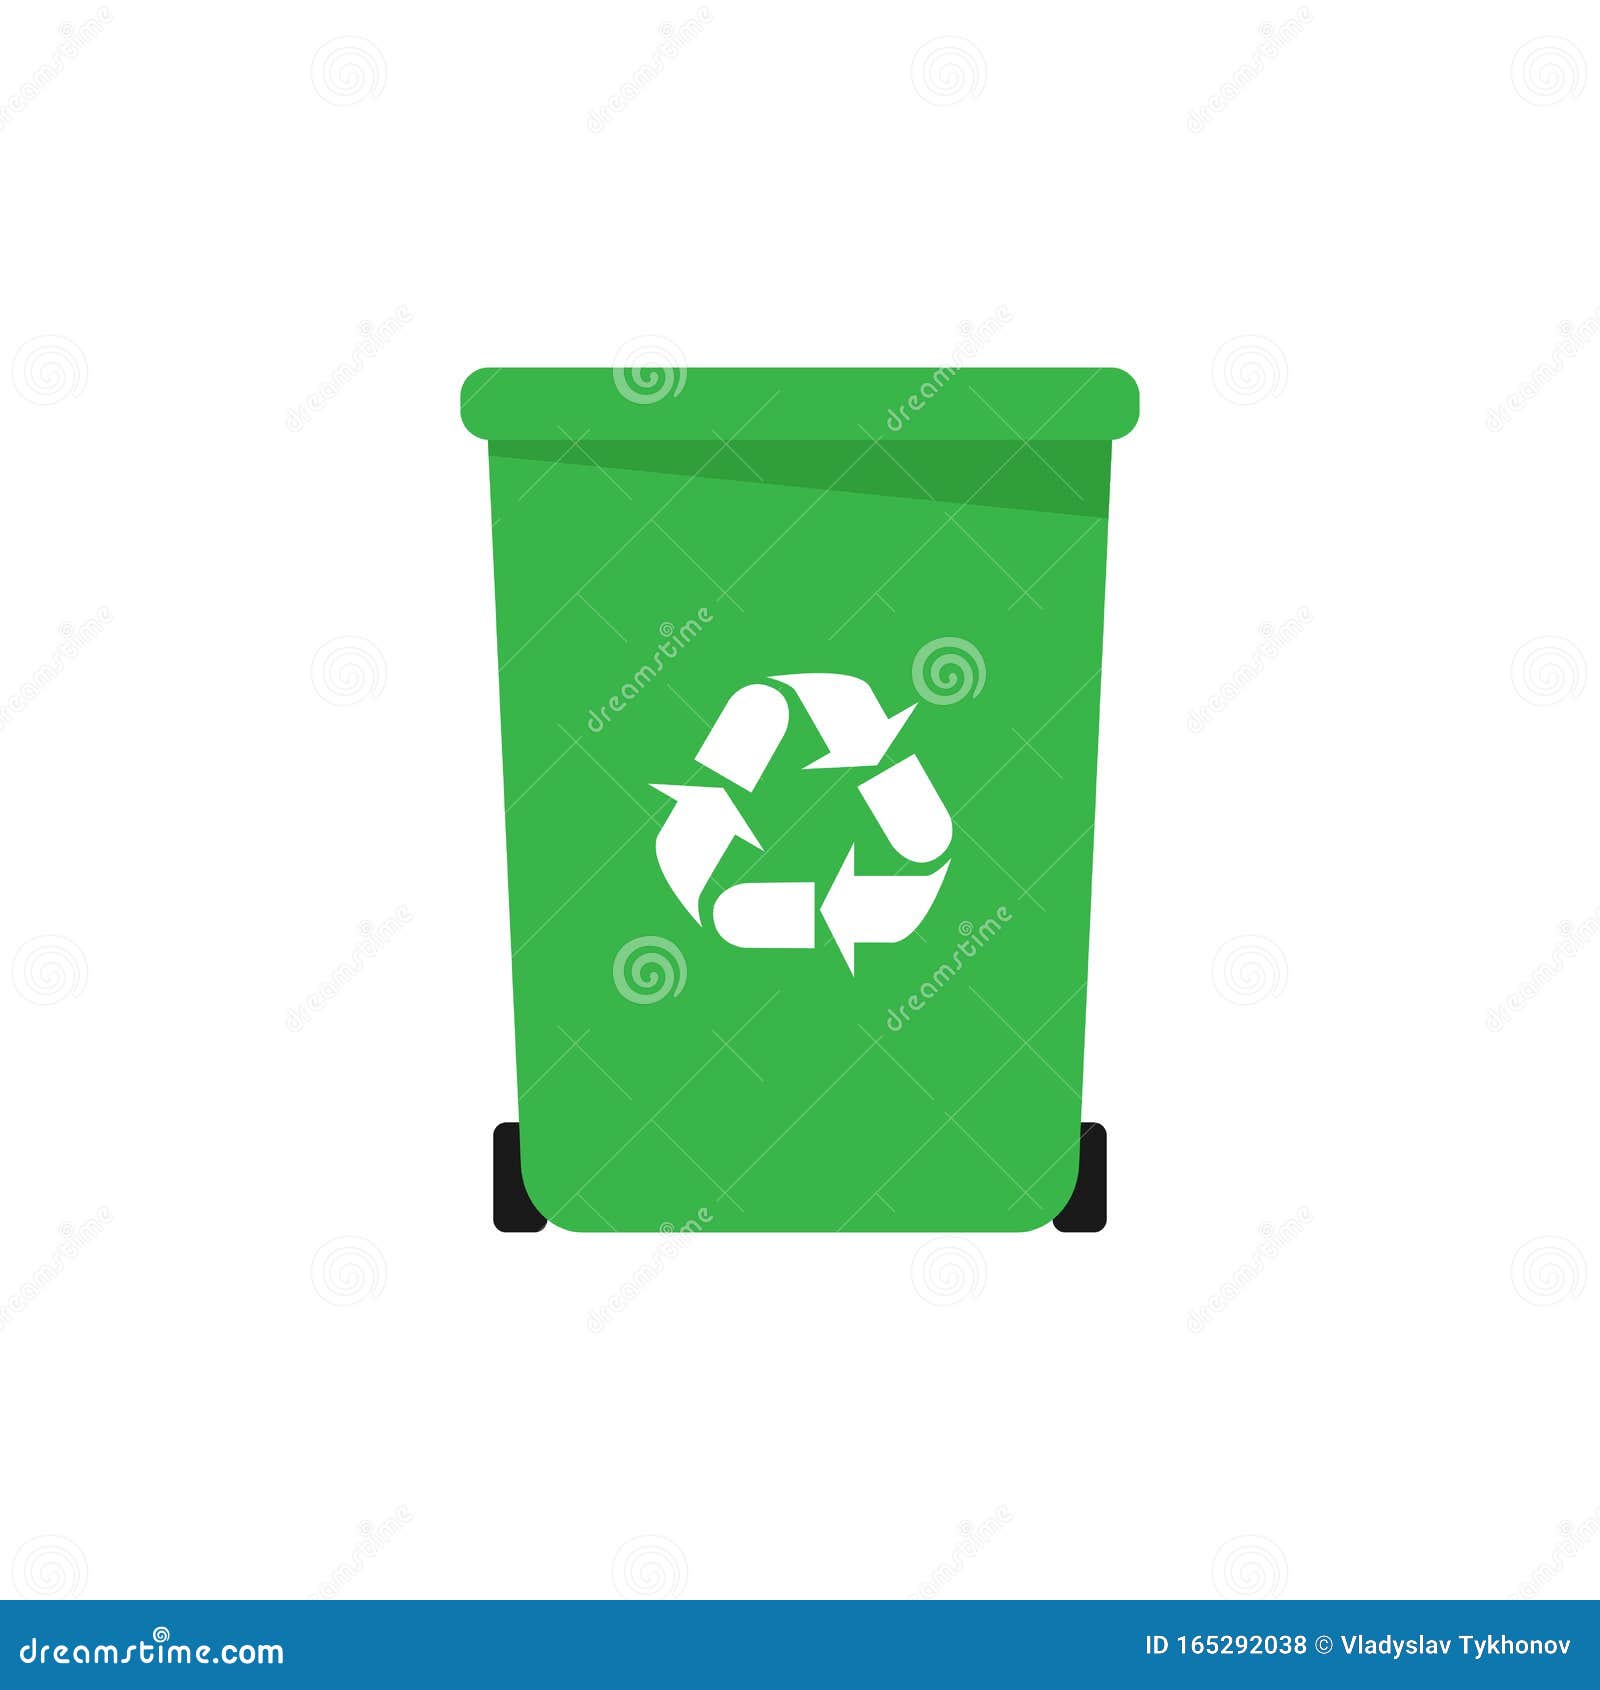 Garbage Bin Or Trash Can Waste And Rubbish Recycling Symbol Vector Illustration Eps 10 Stock Vector Illustration Of Management Environmental